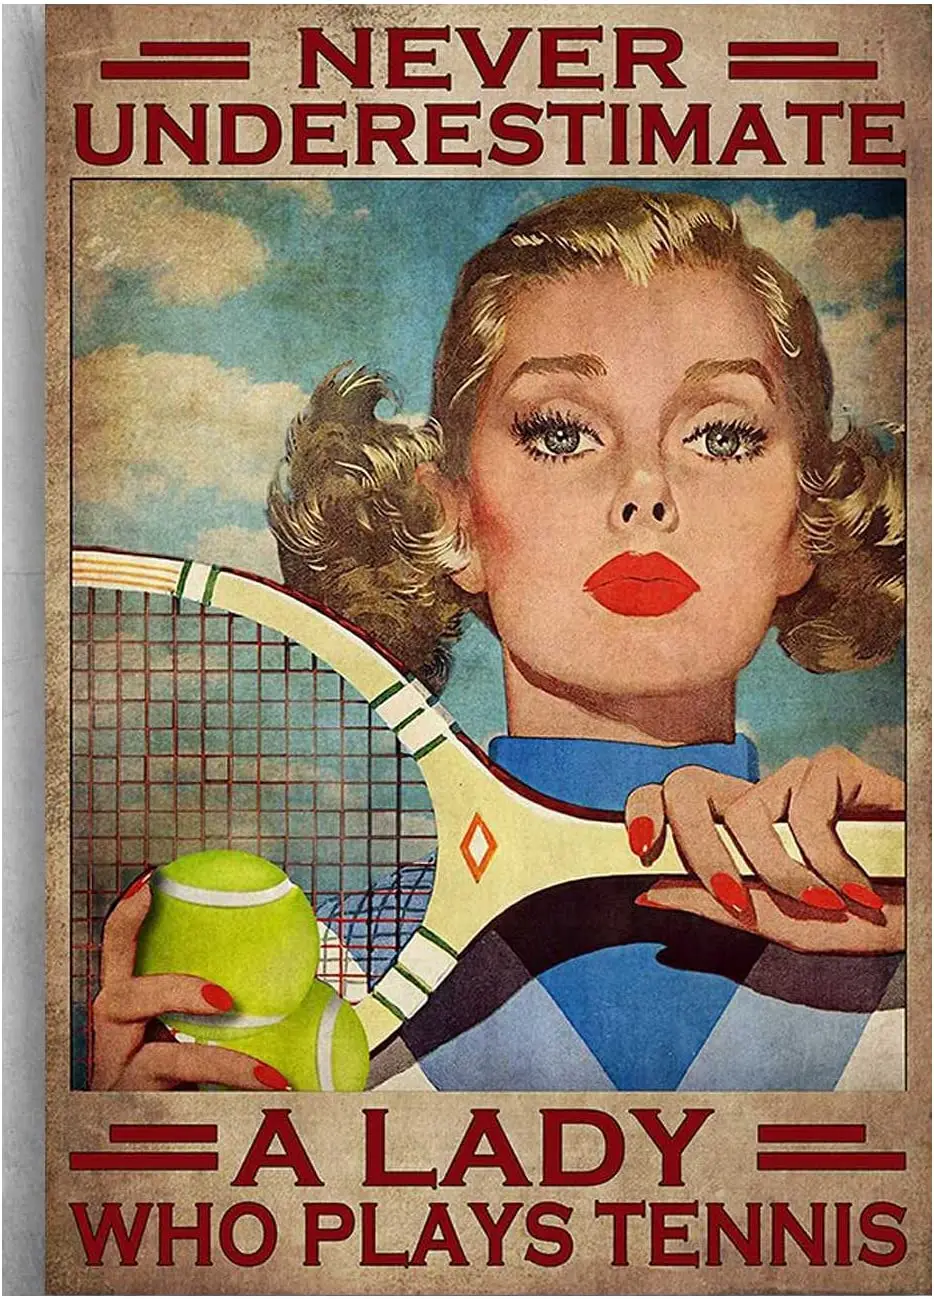 

Tin Sign Vintage Wall Poster Girl Tennis Tennis Player - Never Underestimate A Lady Who Plays Tennis Vintage Metal Tin Sign 1